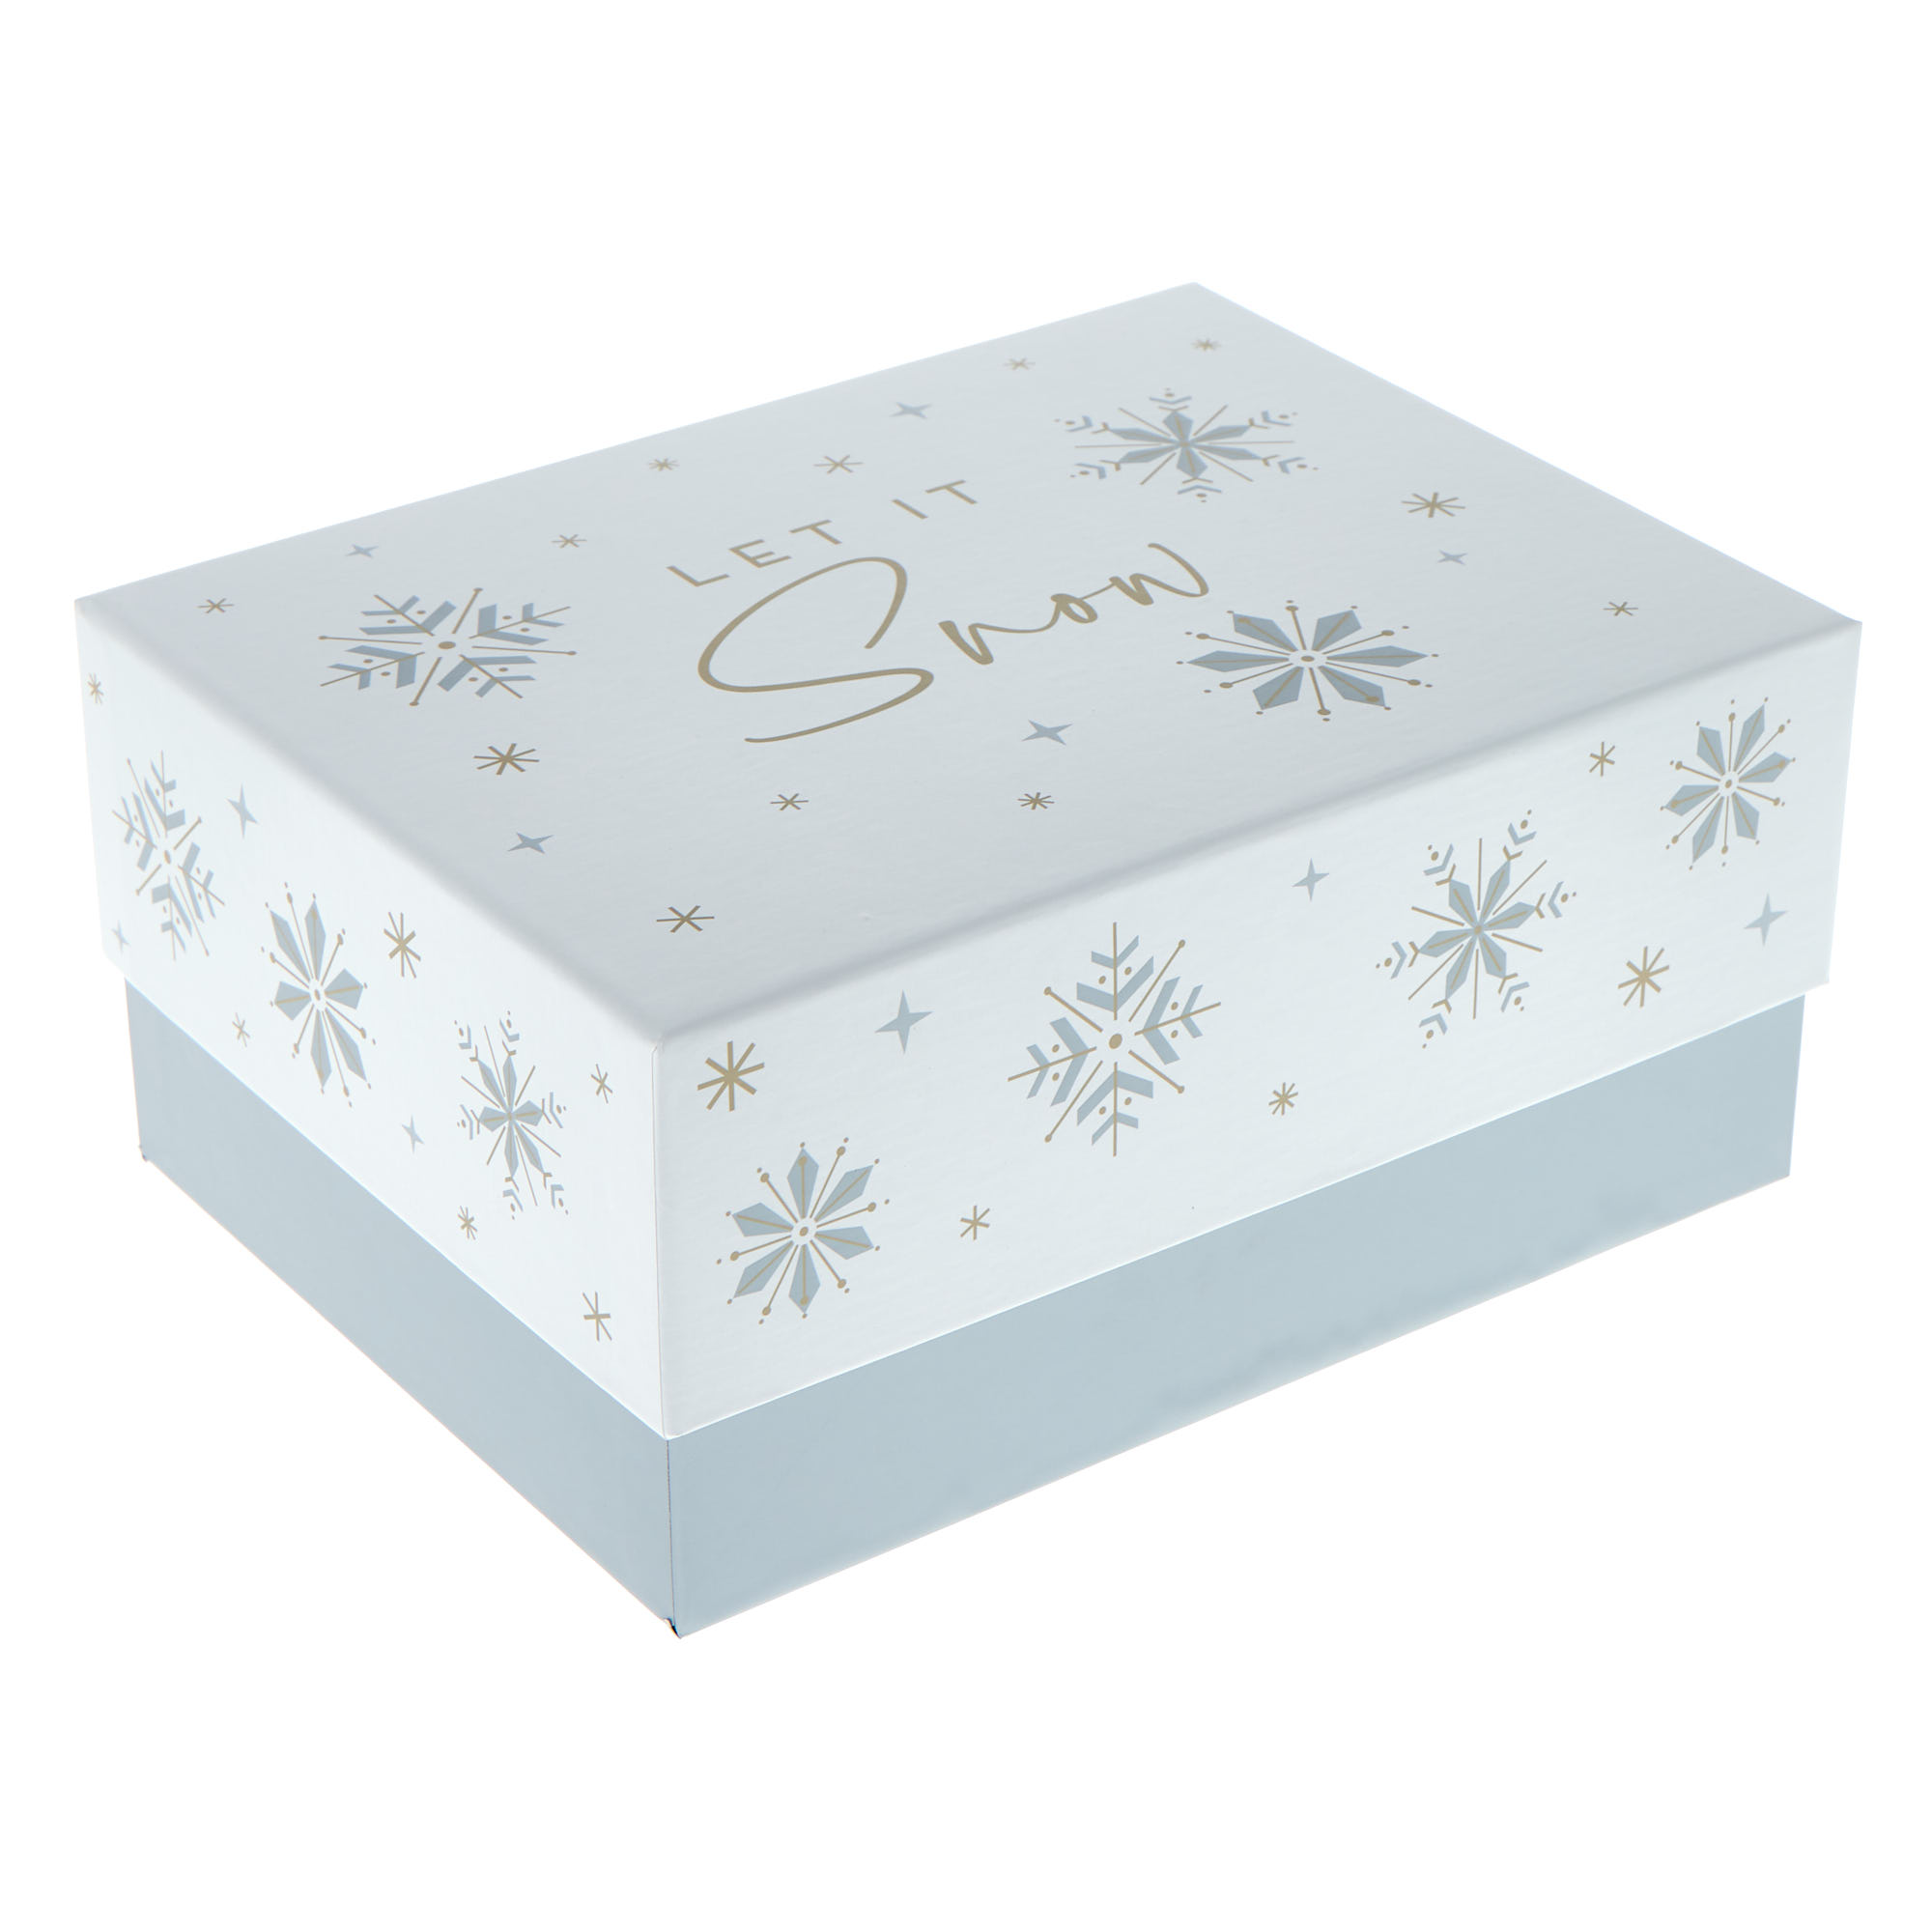 Let It Snow Gift Boxes - Set of 3